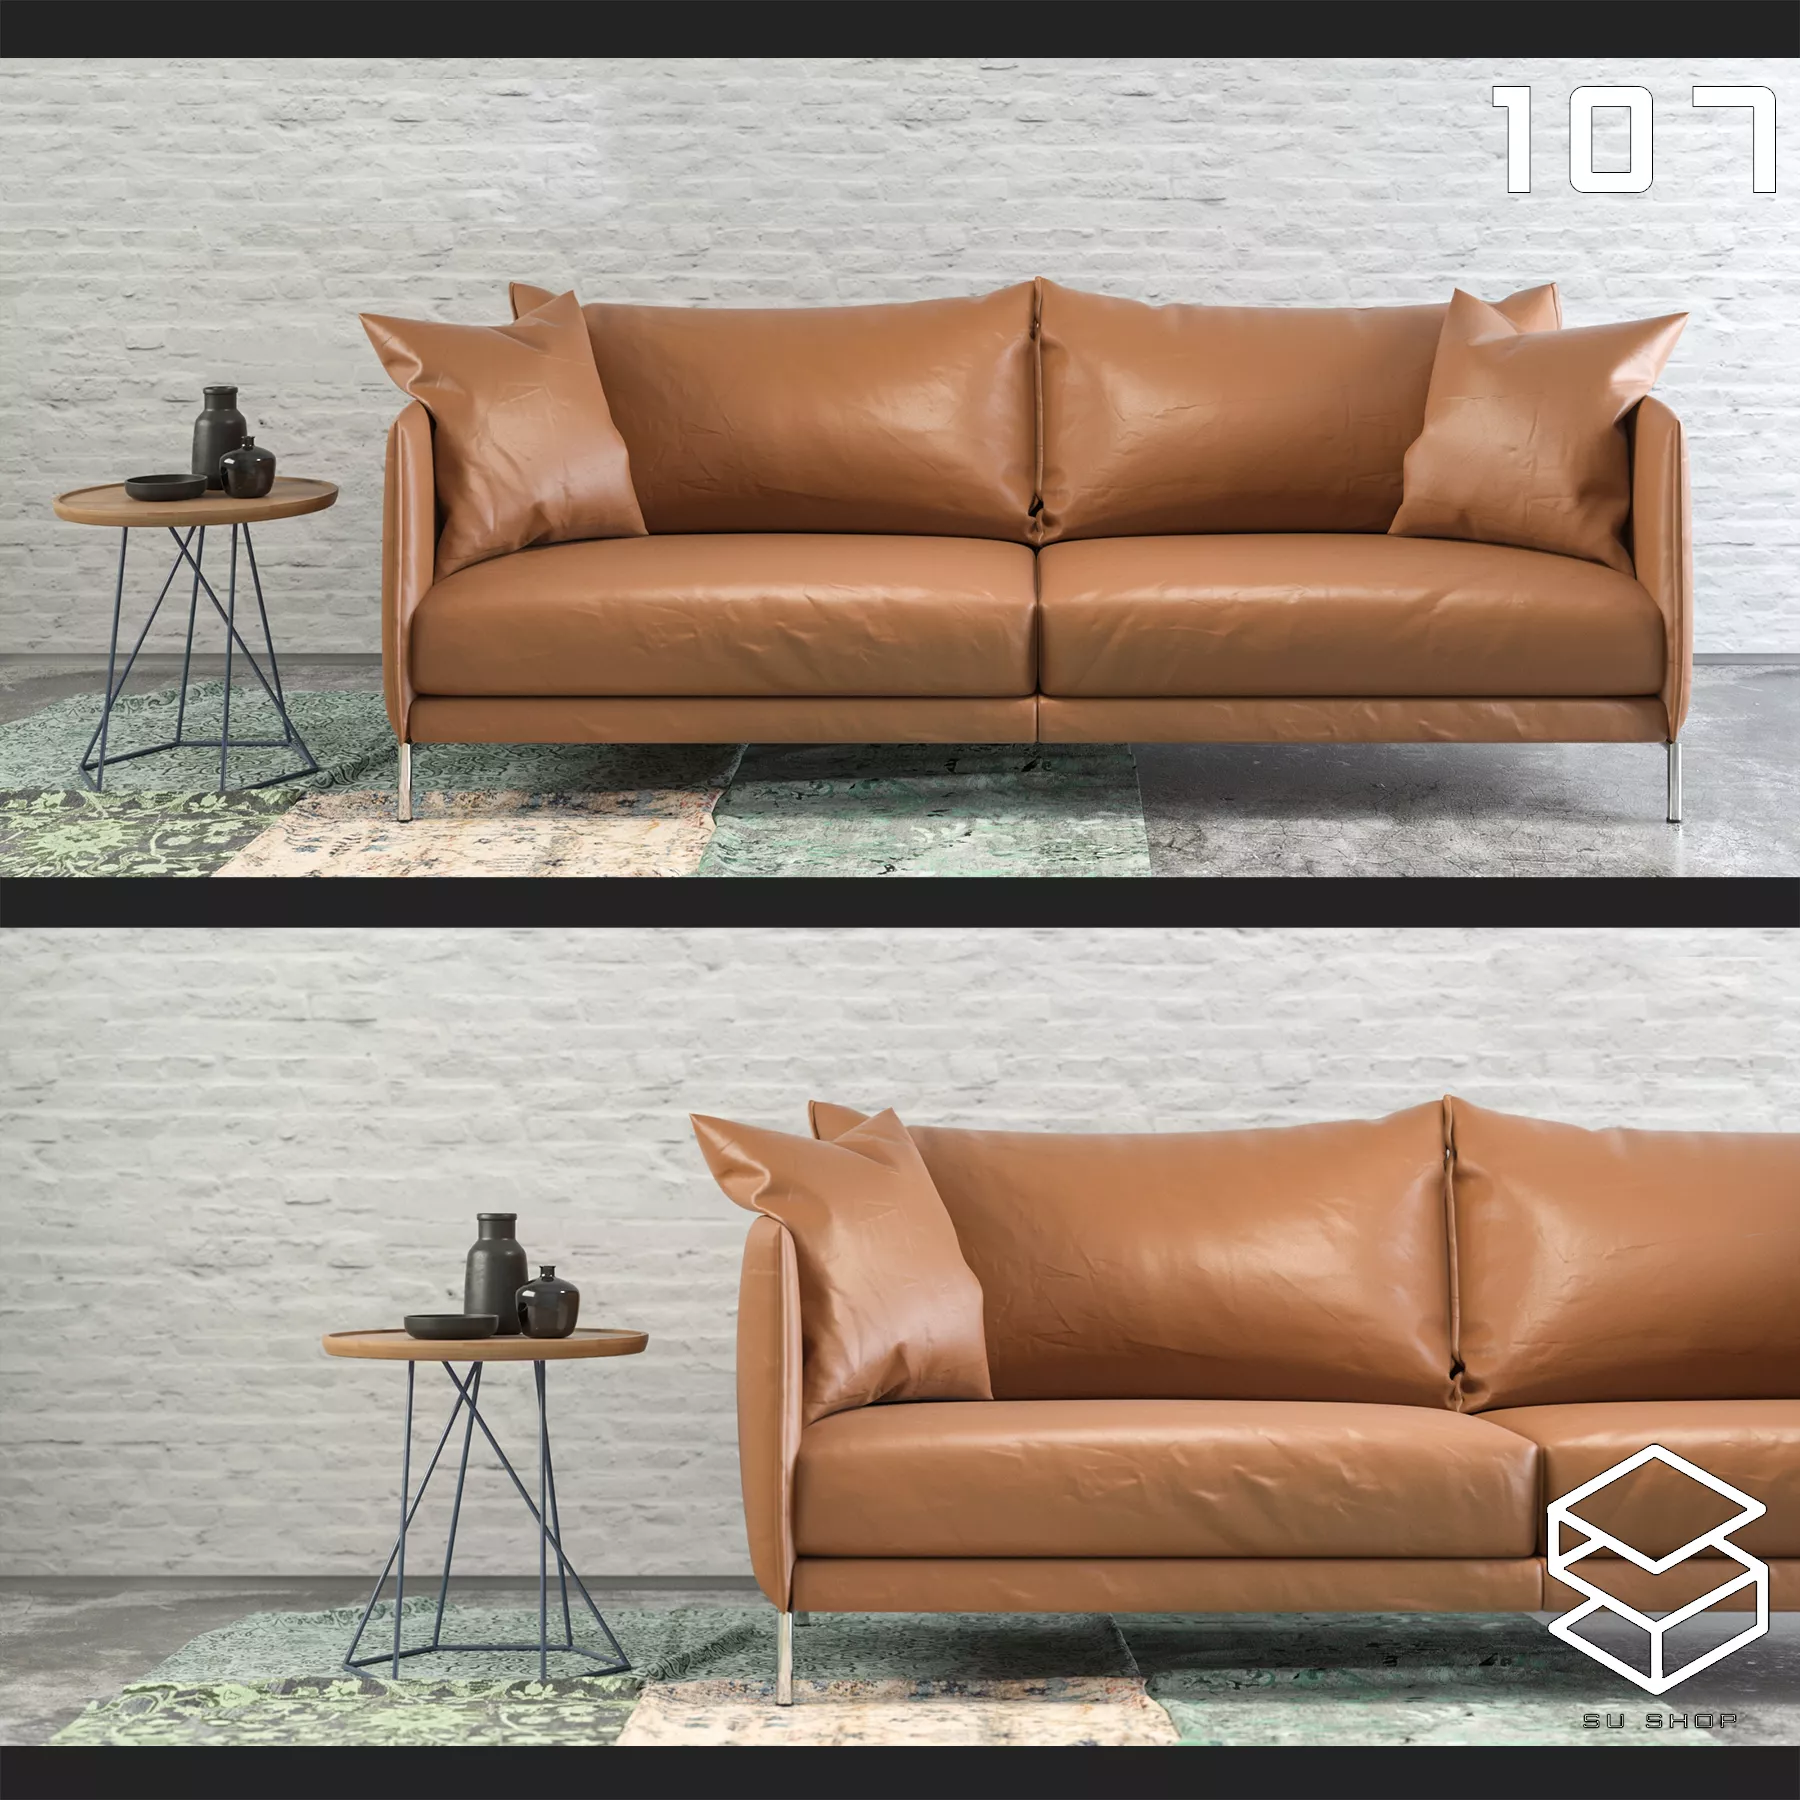 MODERN SOFA - SKETCHUP 3D MODEL - VRAY OR ENSCAPE - ID13394